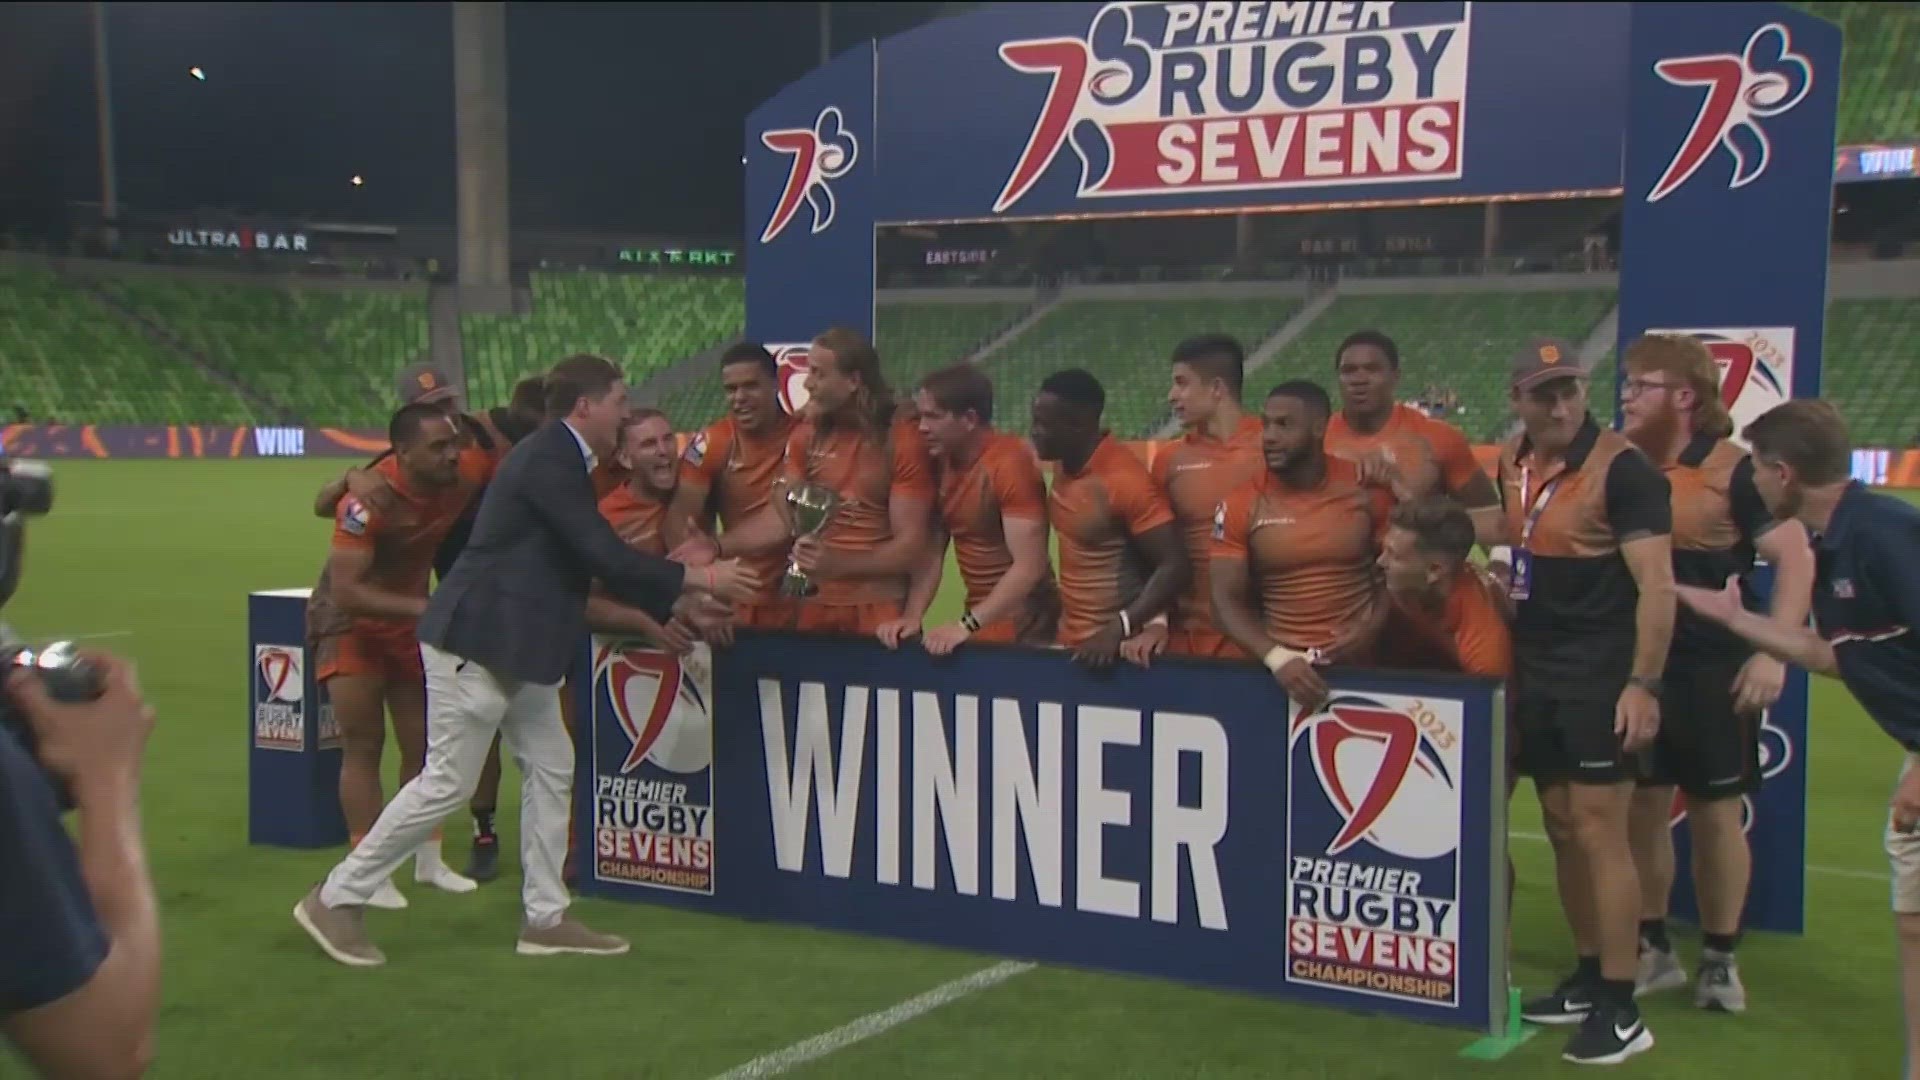 The Texas Team Men celebrate after winning Premier Rugby Sevens Eastern Conference Kickoff Championship kvue